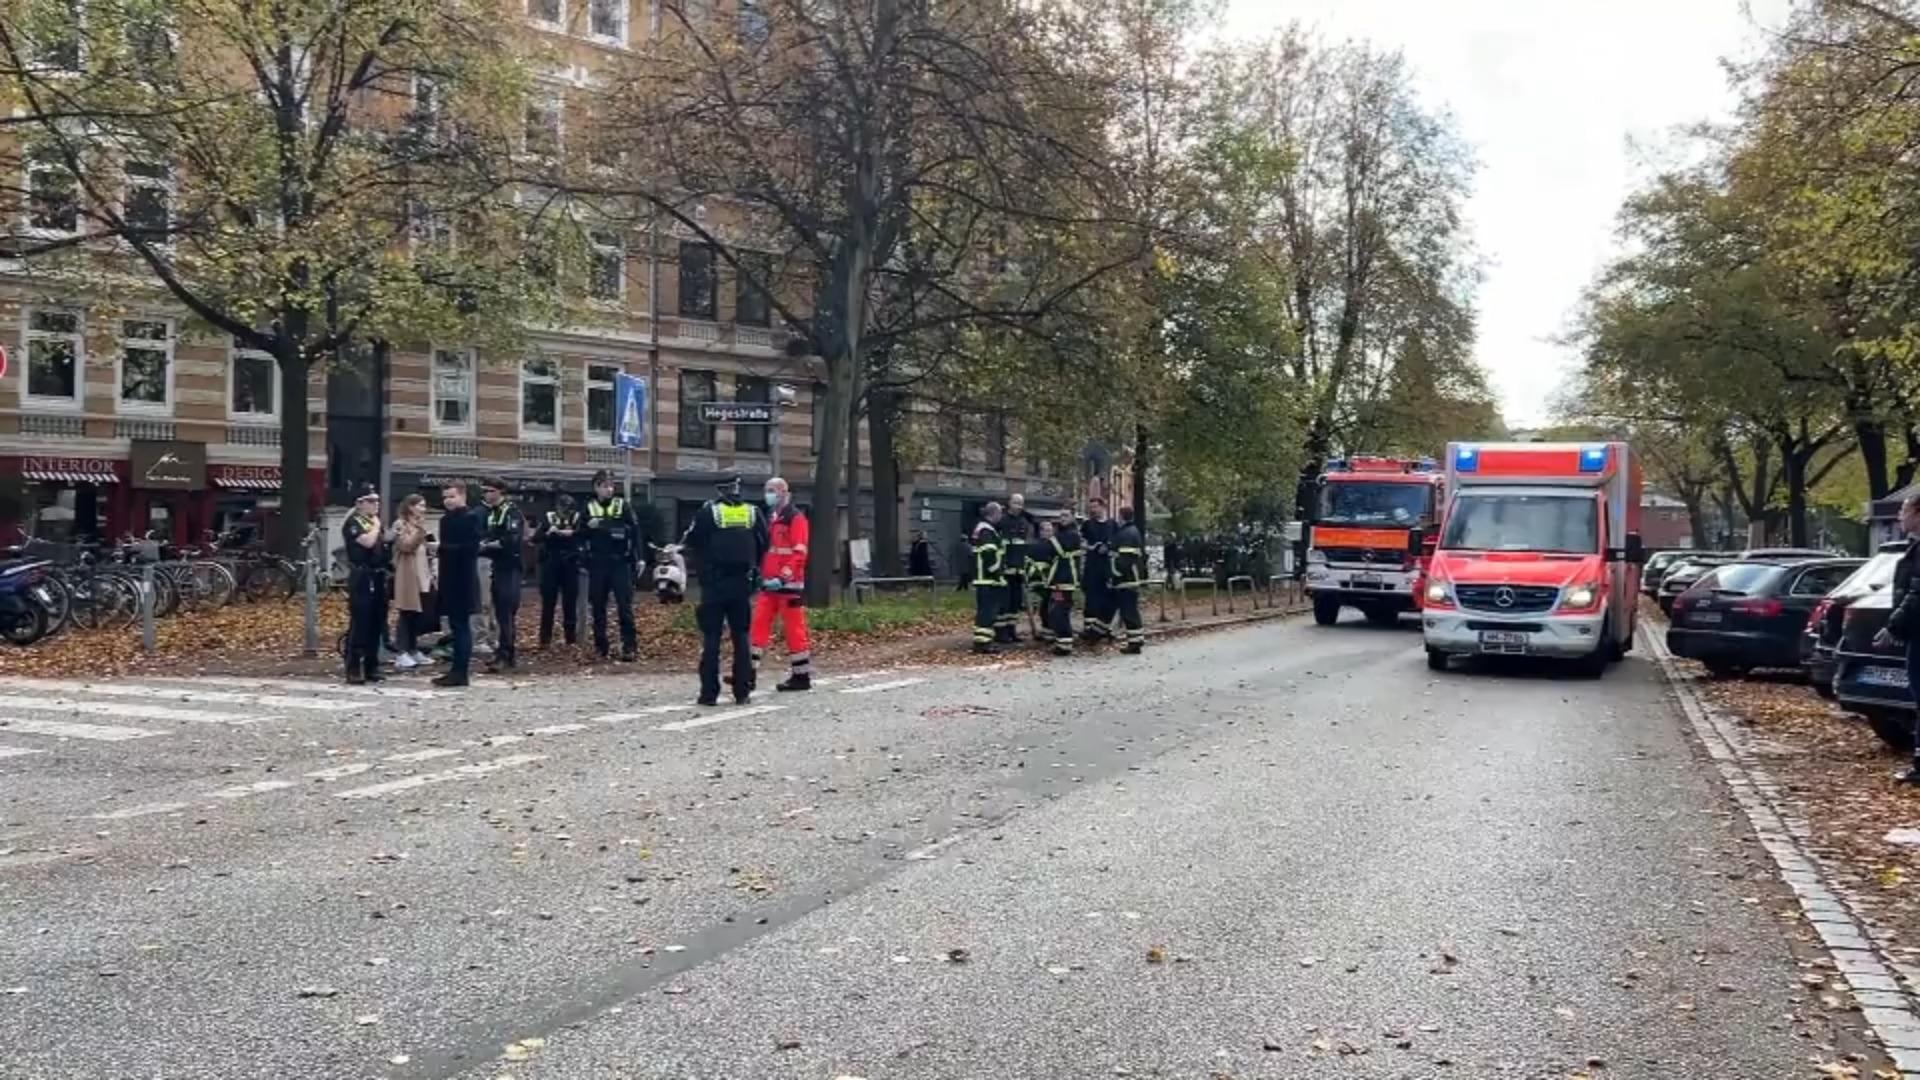 A truck driver escapes without helping a woman who ran over him in Hamburg